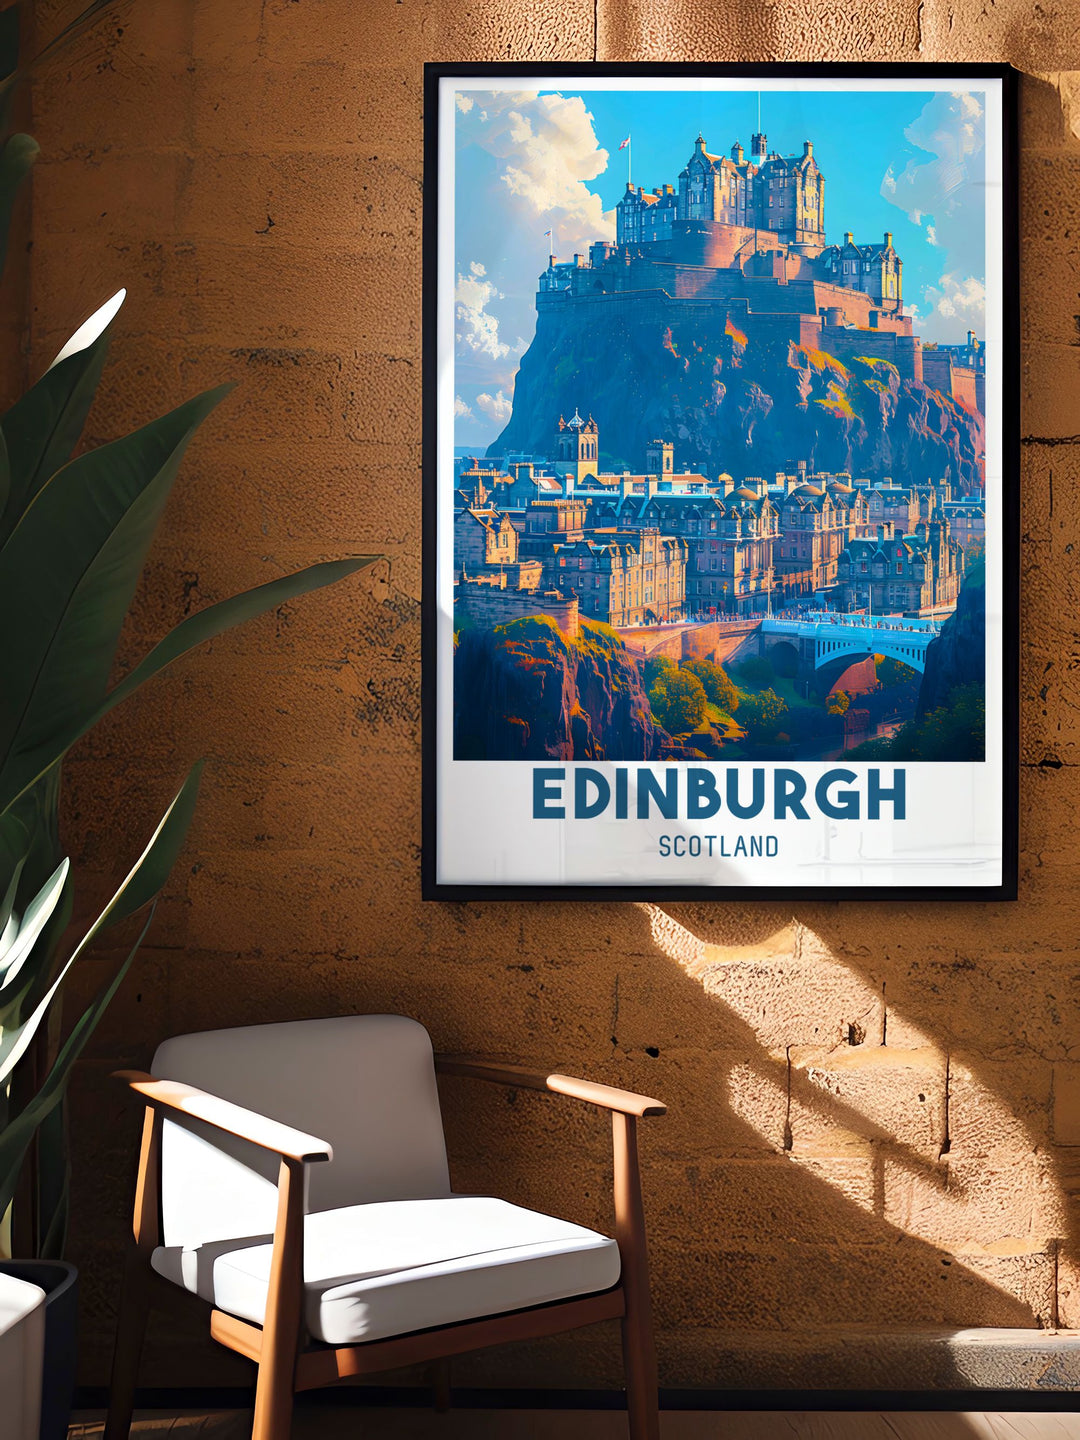 Gallery wall art illustrating the bustling Royal Mile, perfect for adding a touch of Edinburghs historic charm and vibrant culture to any room.